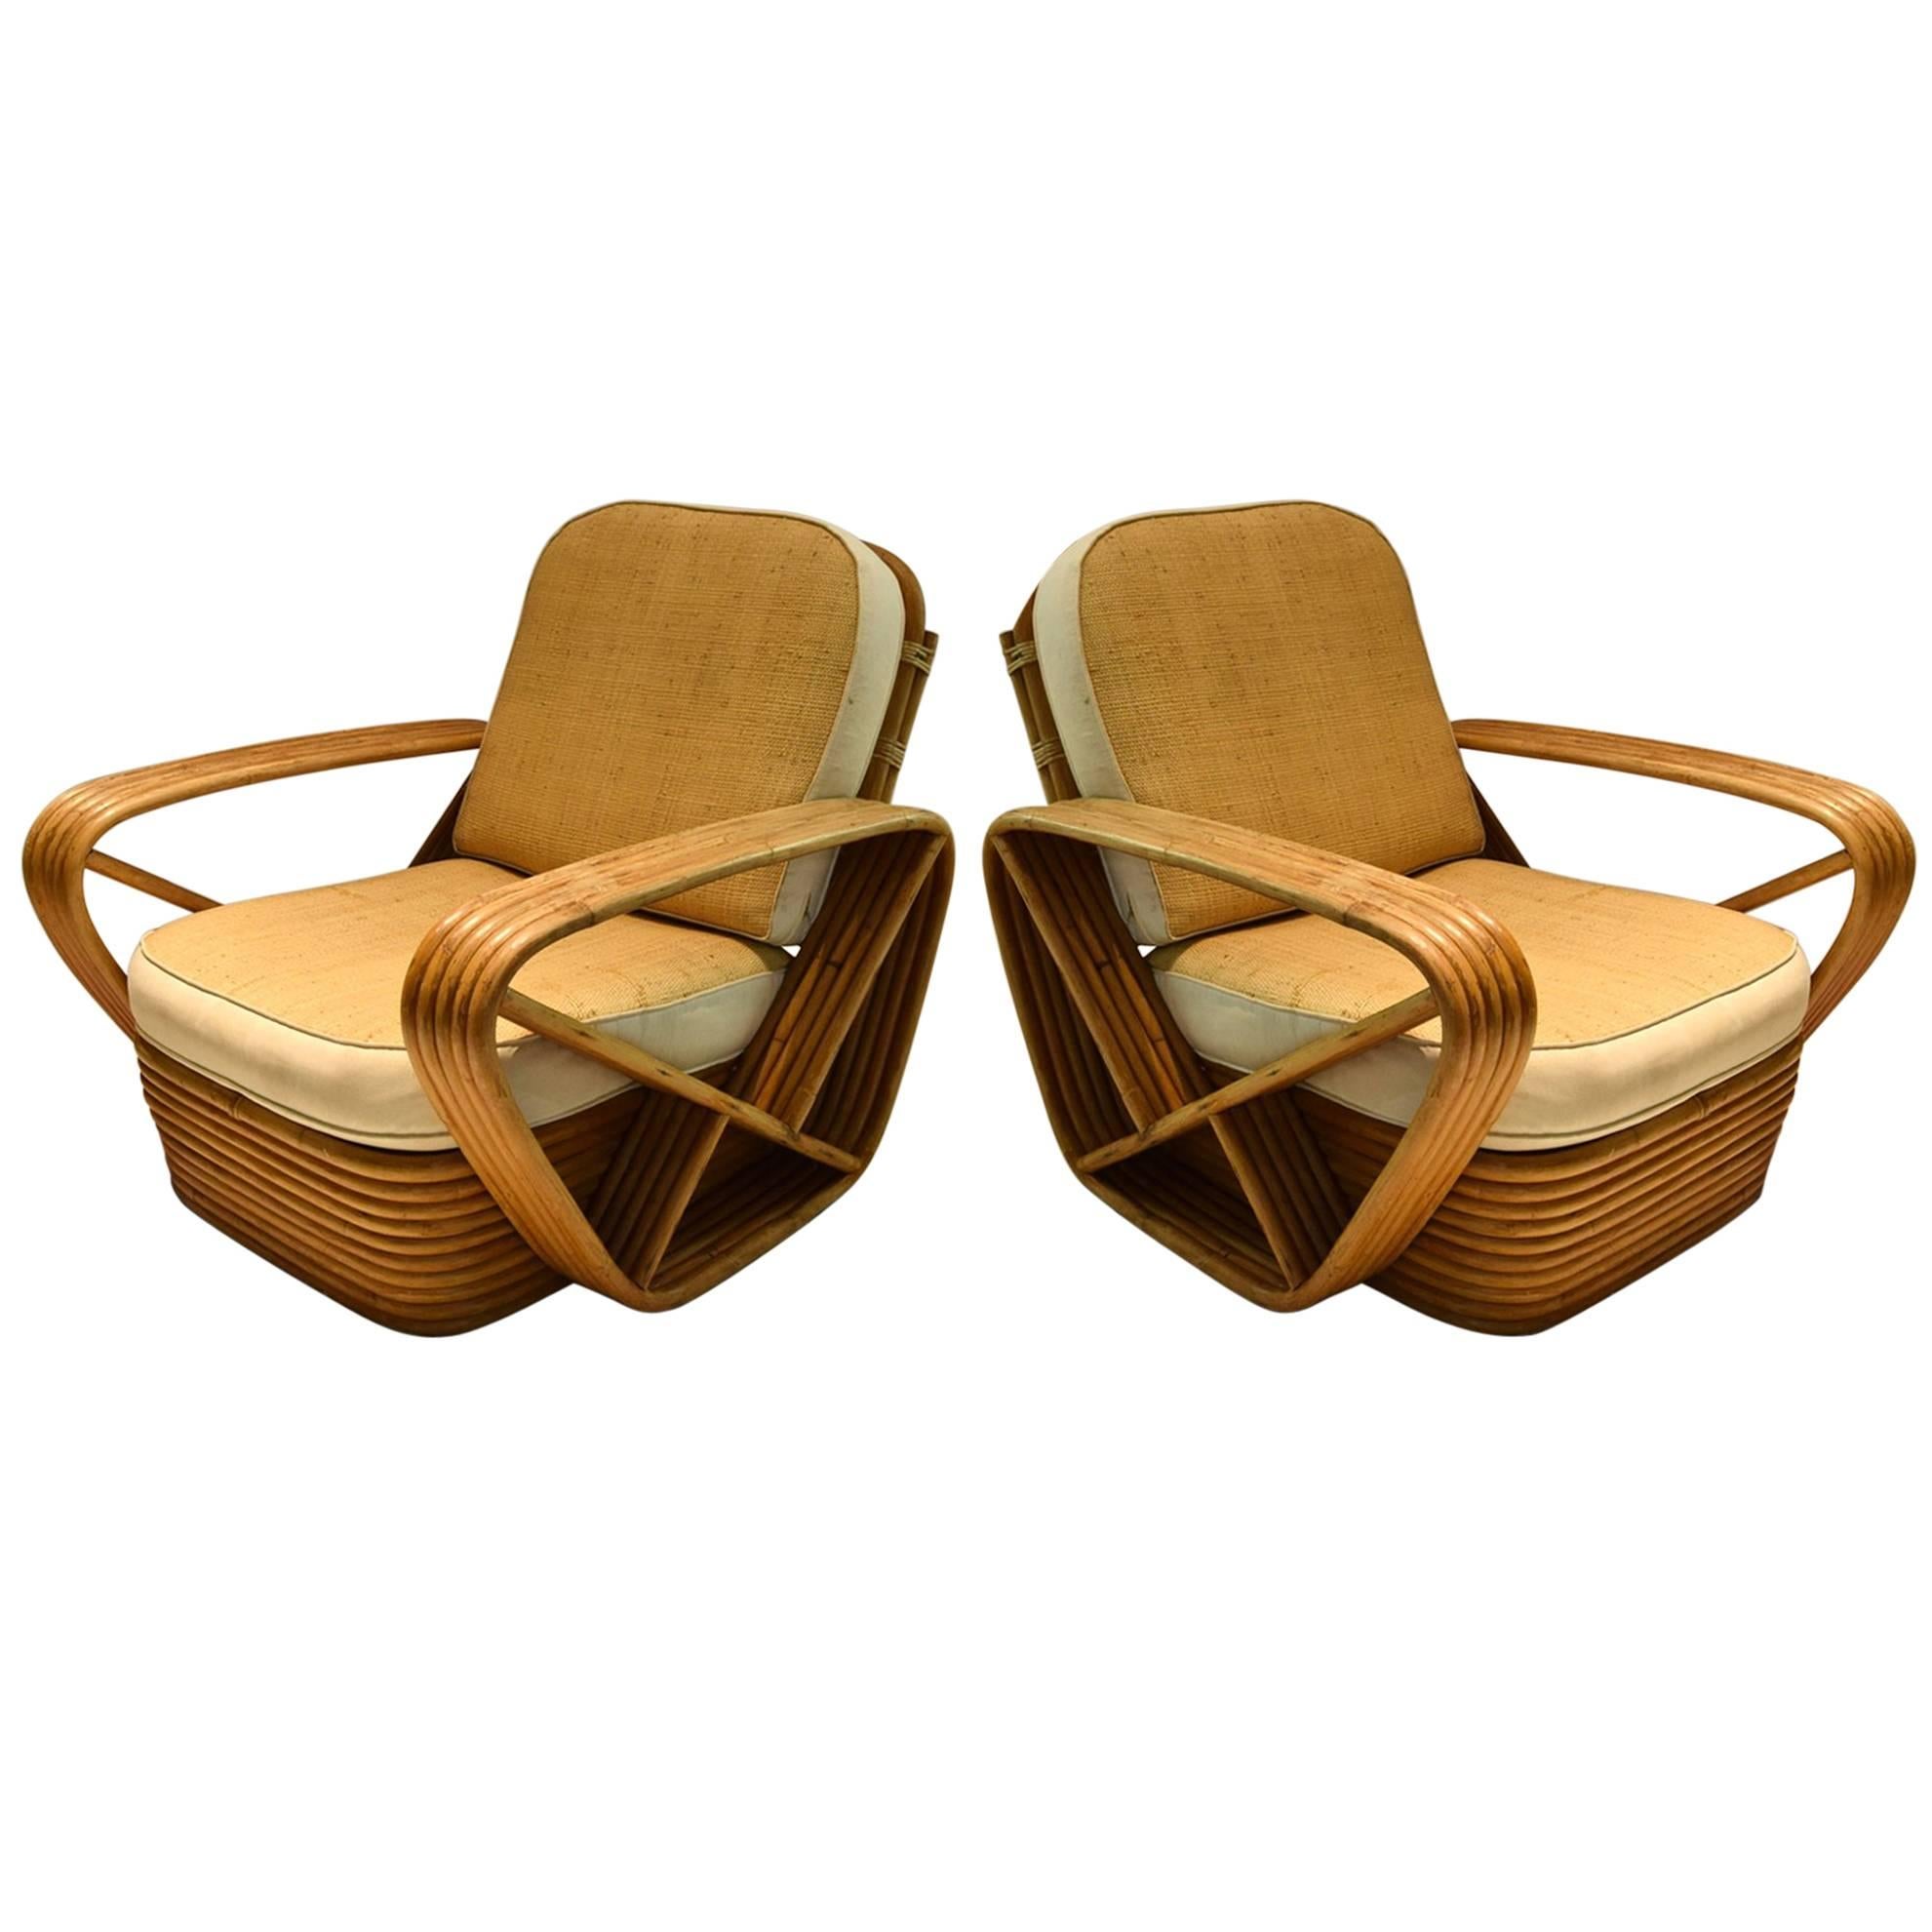 Pair of 5-Reed Bamboo Lounge Chairs, with Ottoman Paul Frankl, circa 1940